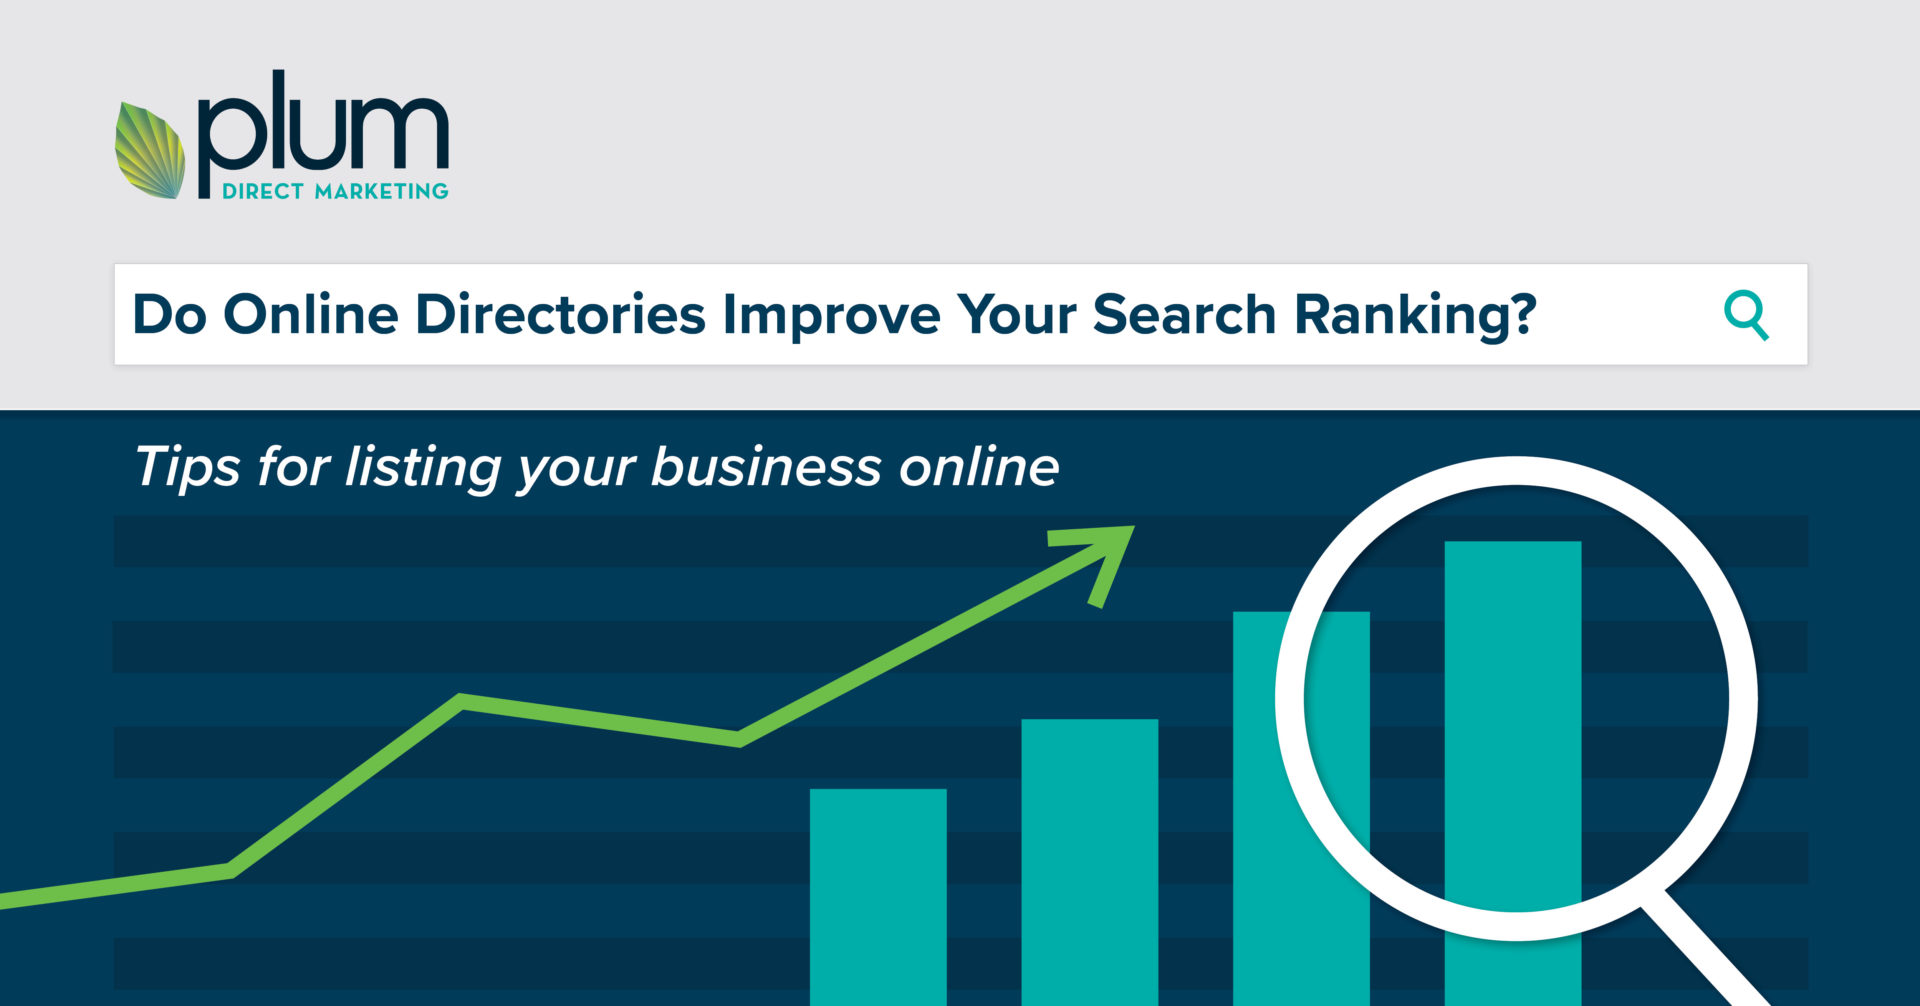 Do Online Directories Improve Your Search Ranking?